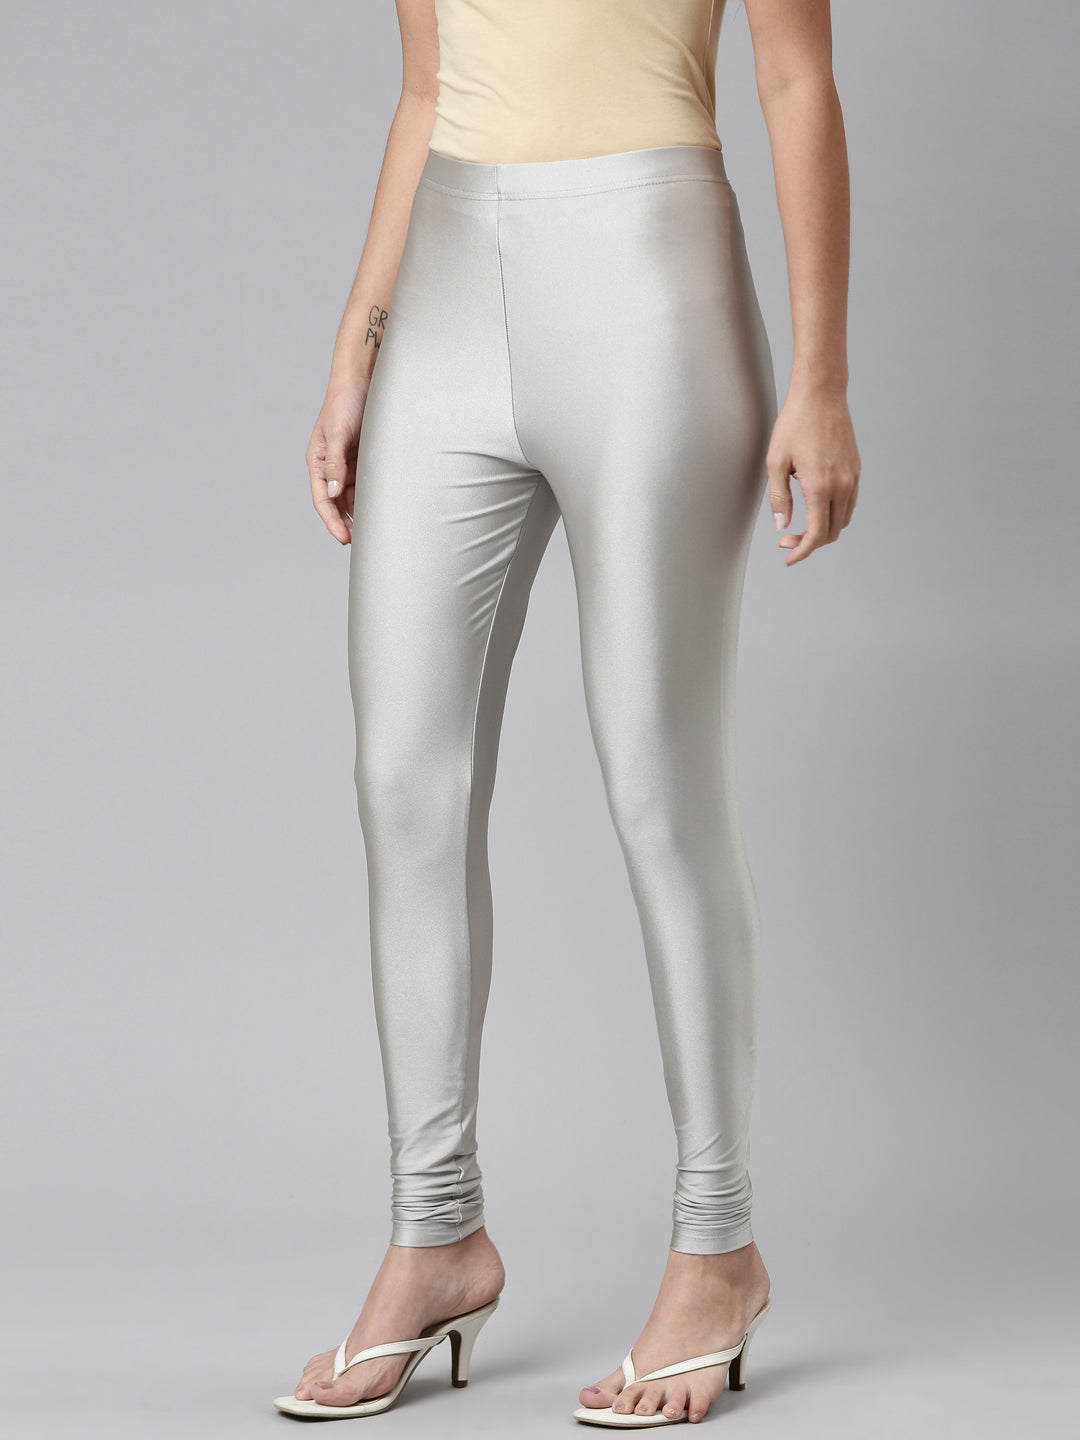 Women's Leggings - Discover online a large selection of Leggings - Fast  delivery | Spartoo Europe !